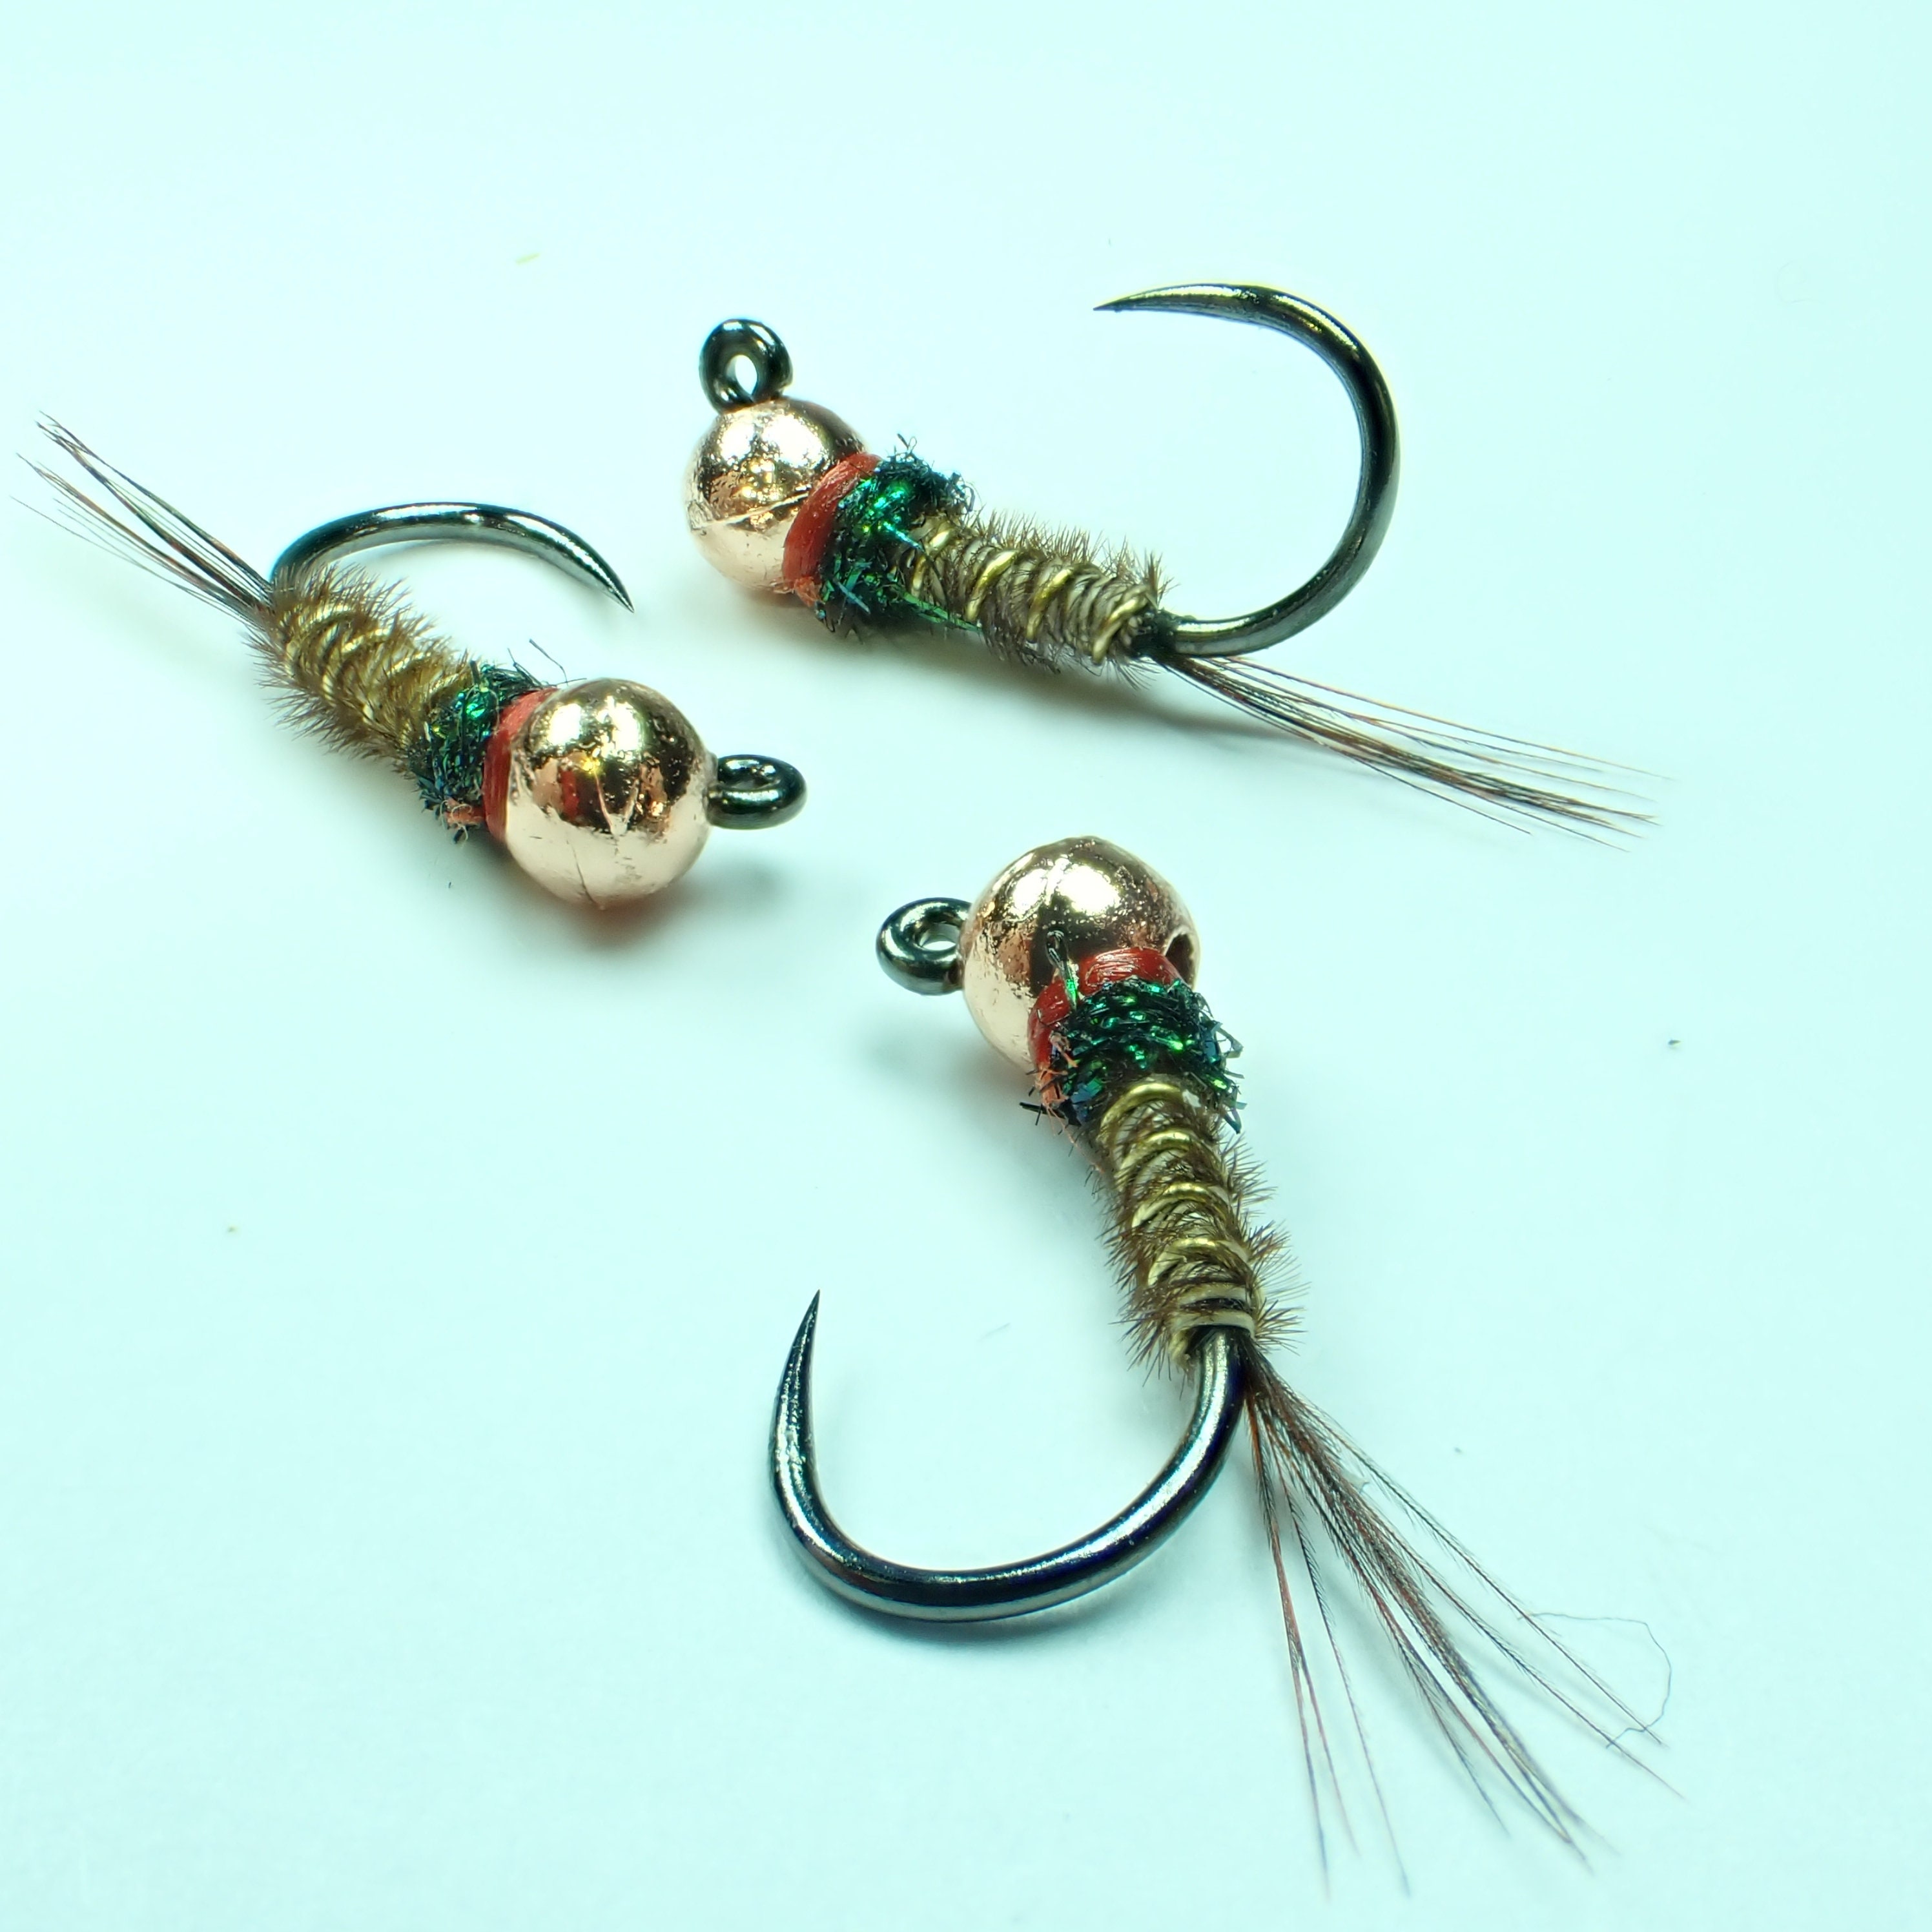 Copperhead Frenchie, Barbless Jig Nymph Fishing Fly With Tungsten Bead,  Great for Euro Nymphing, Sinks Fast, Great Gift for Fly Anglers. 